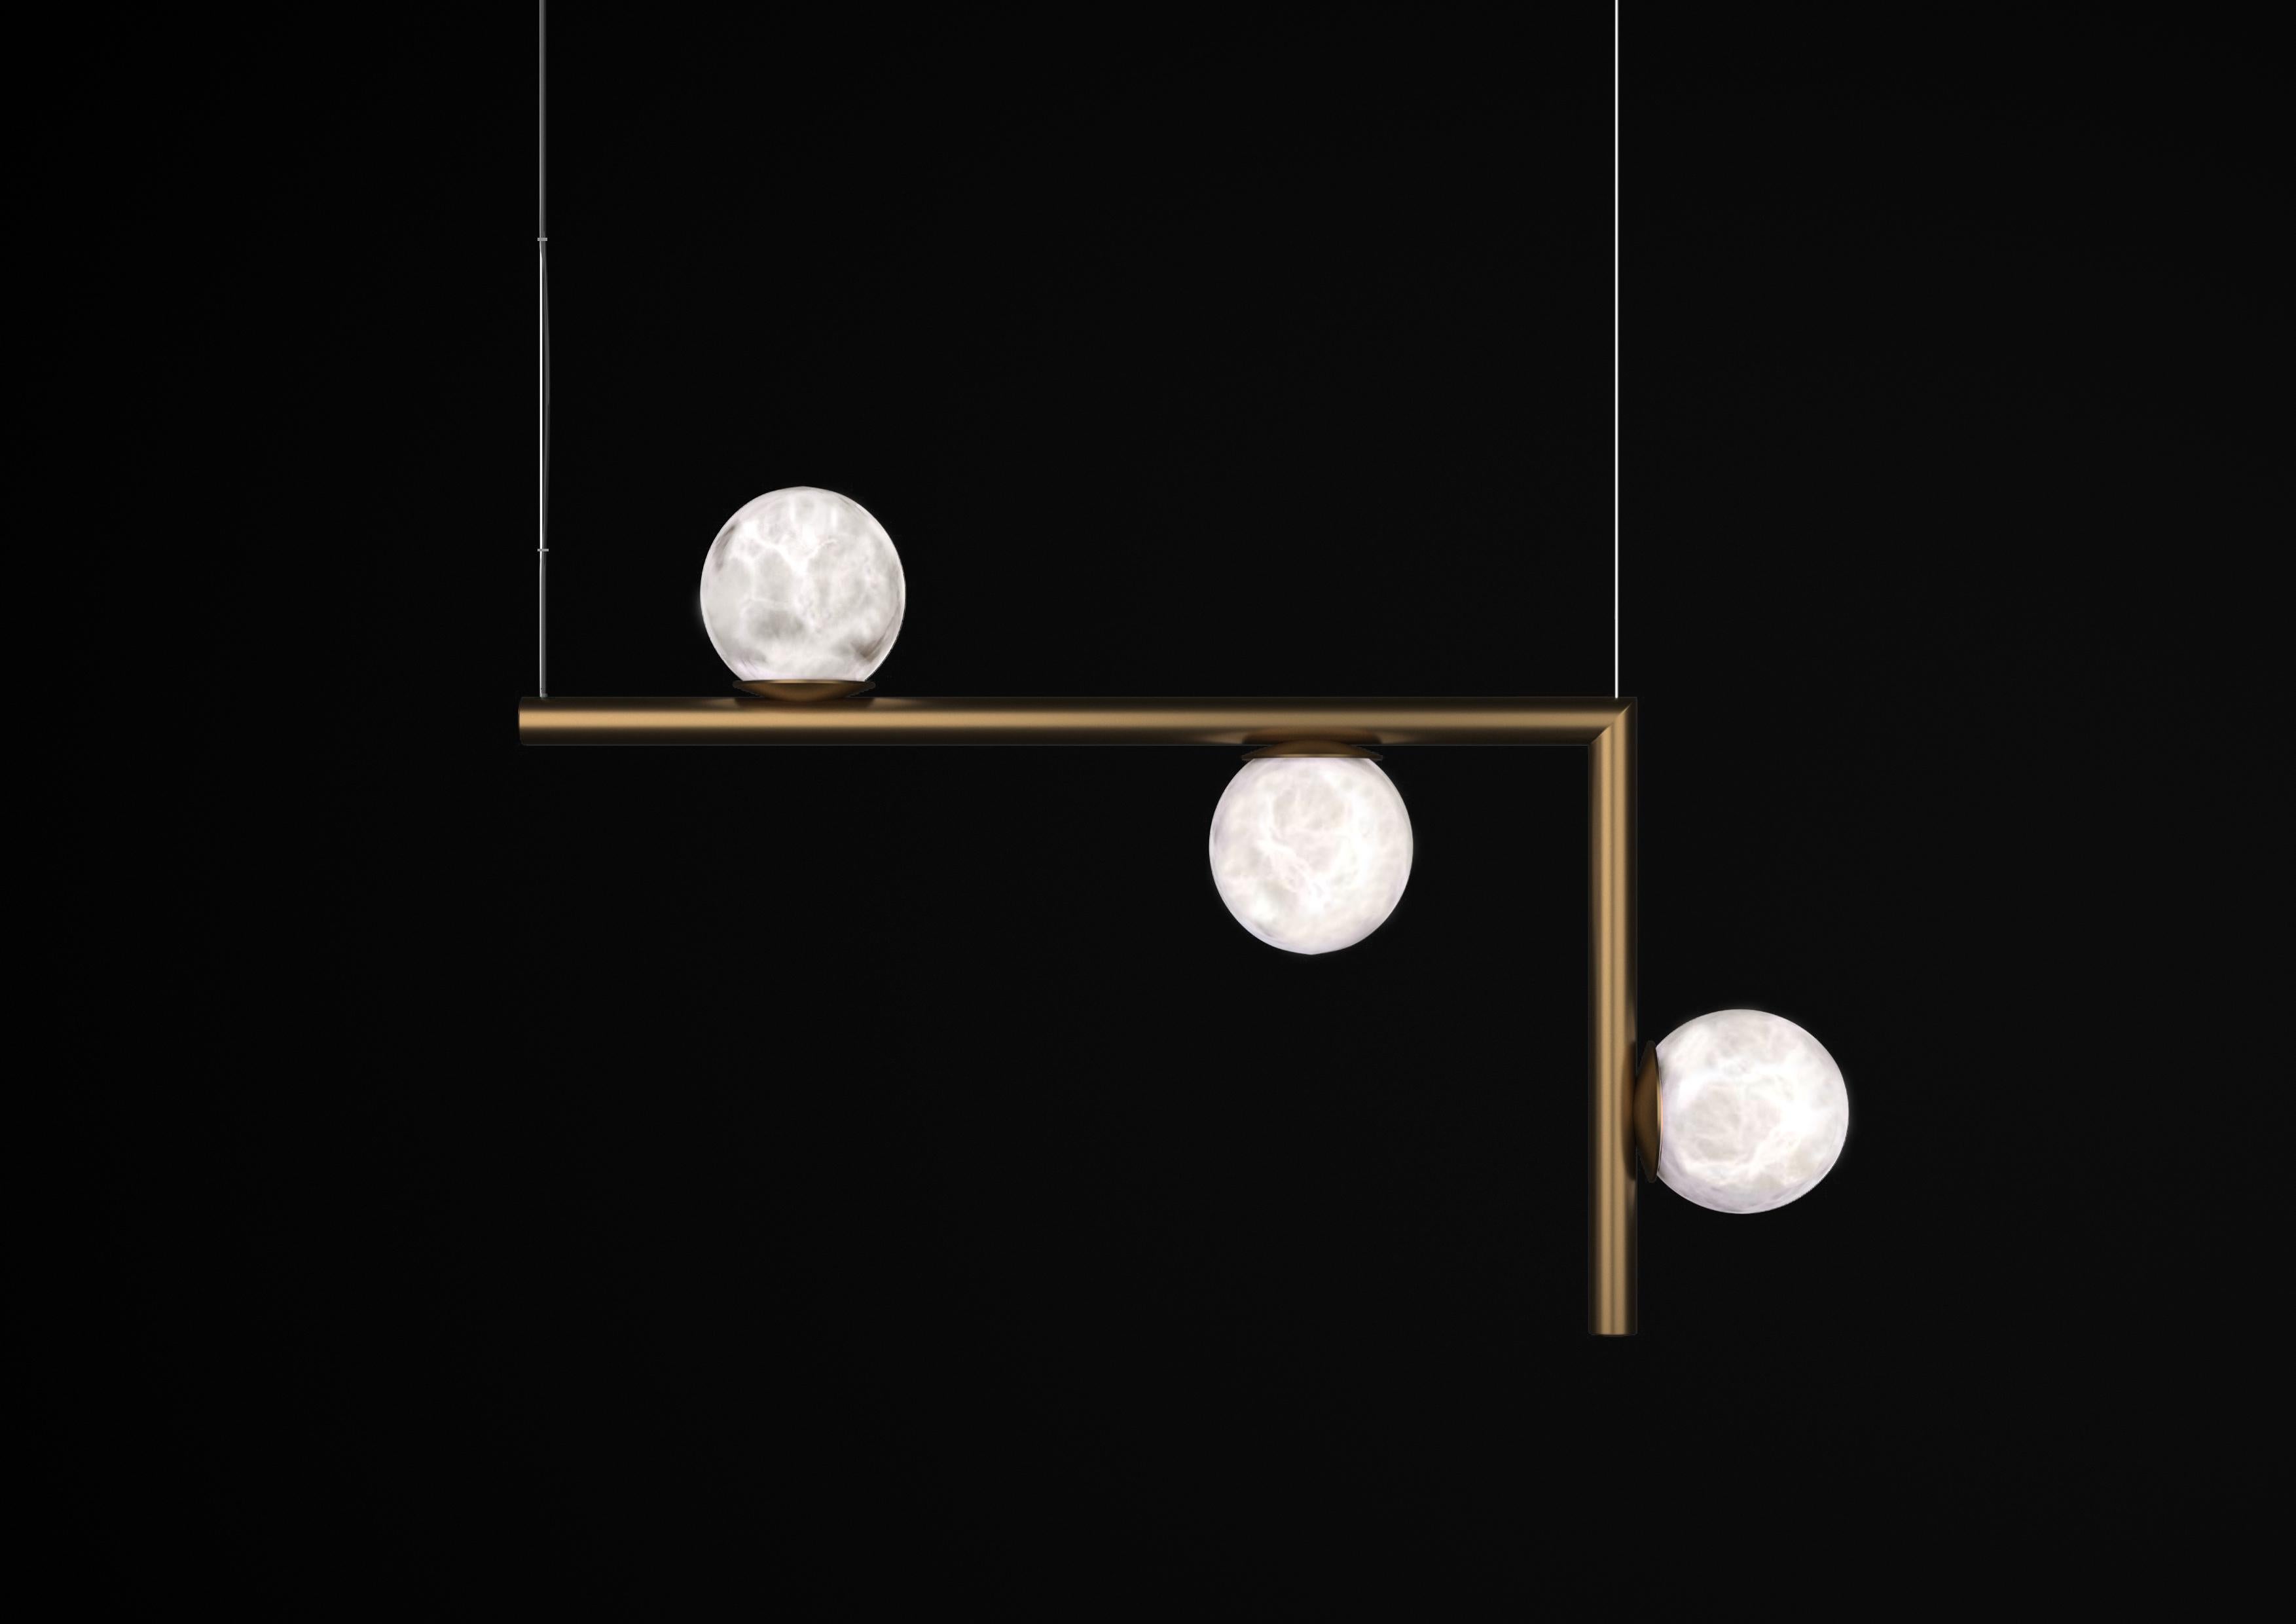 Ofione 2 Bronze Pendant Lamp by Alabastro Italiano
Dimensions: D 14 x W 85 x H 55 cm.
Materials: White alabaster and bronze.

Available in different finishes: Shiny Silver, Bronze, Brushed Brass, Ruggine of Florence, Brushed Burnished, Shiny Gold,